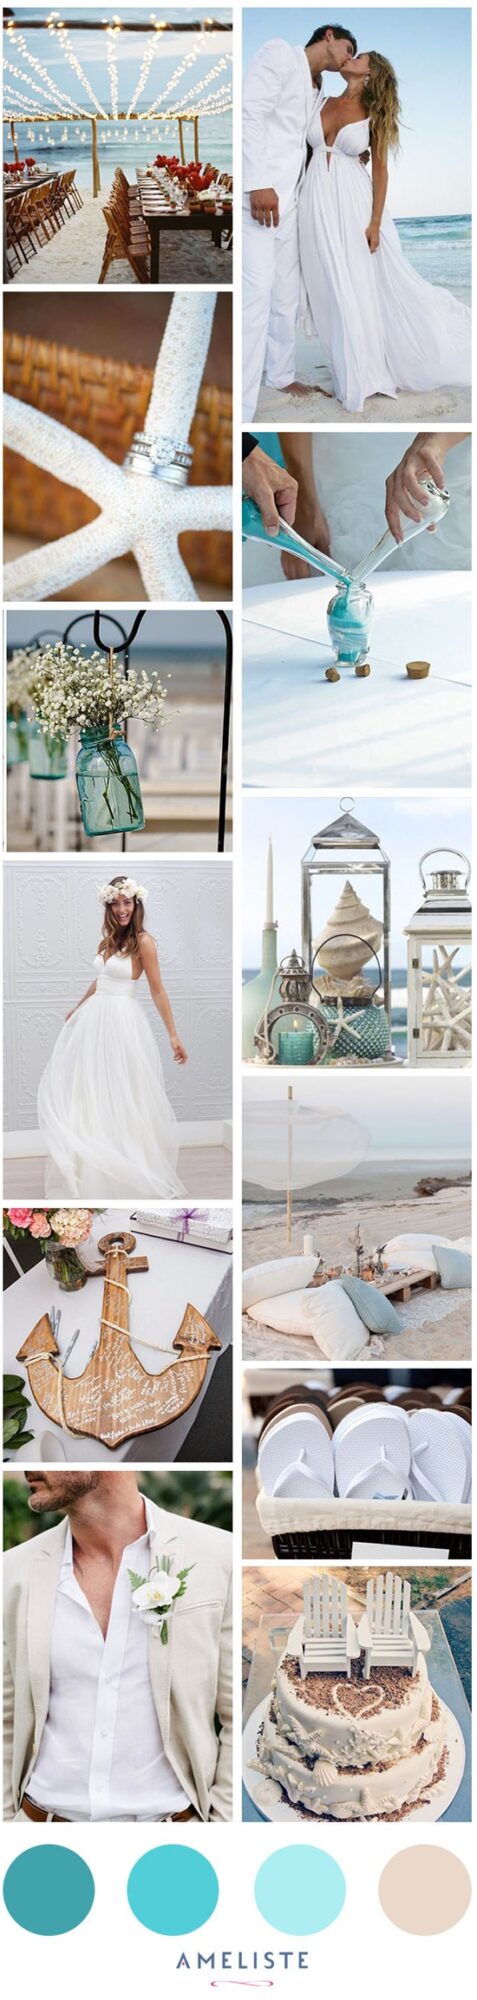 The top 10 wedding themes for 2019/2020 - wedding themes, wedding theme, purple wedding theme, fall wedding theme